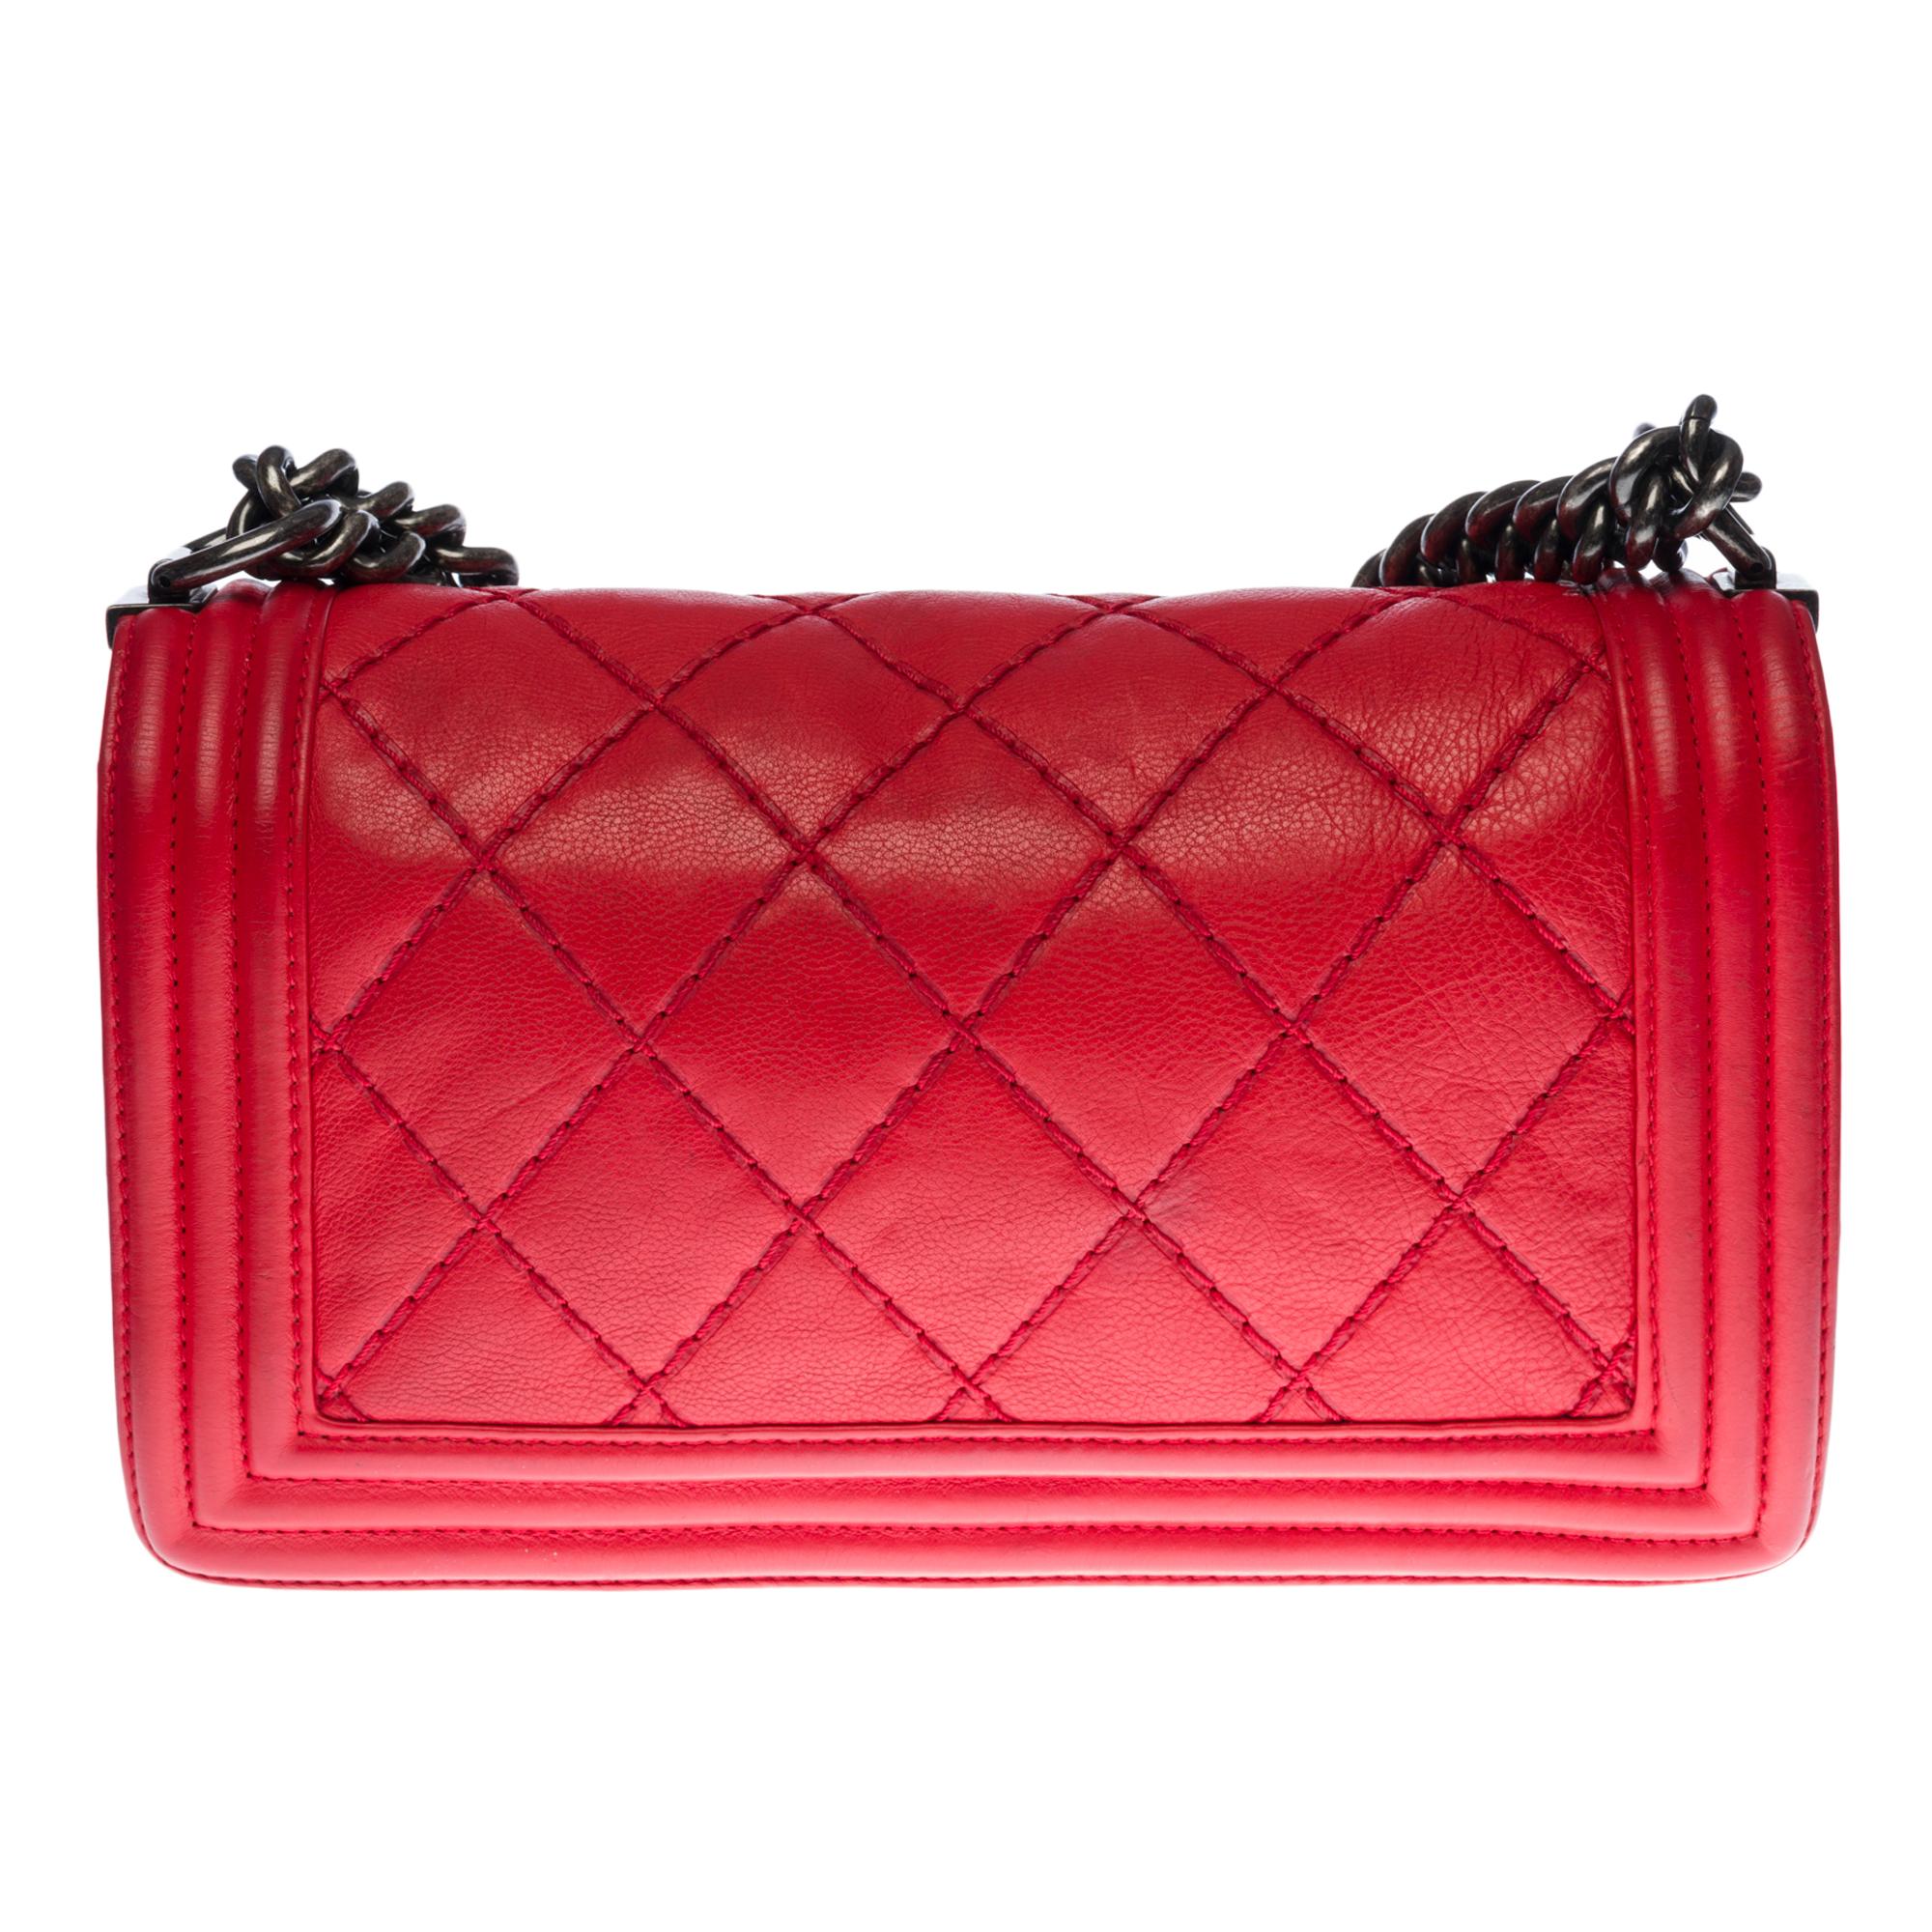 The iconic Chanel Boy shoulder bag old medium in red quilted leather, ruthenium metal hardware, an adjustable ruthenium metal chain handle allowing a shoulder or shoulder support

A ruthenium metal closure on flap
Grey canvas lining, one patch